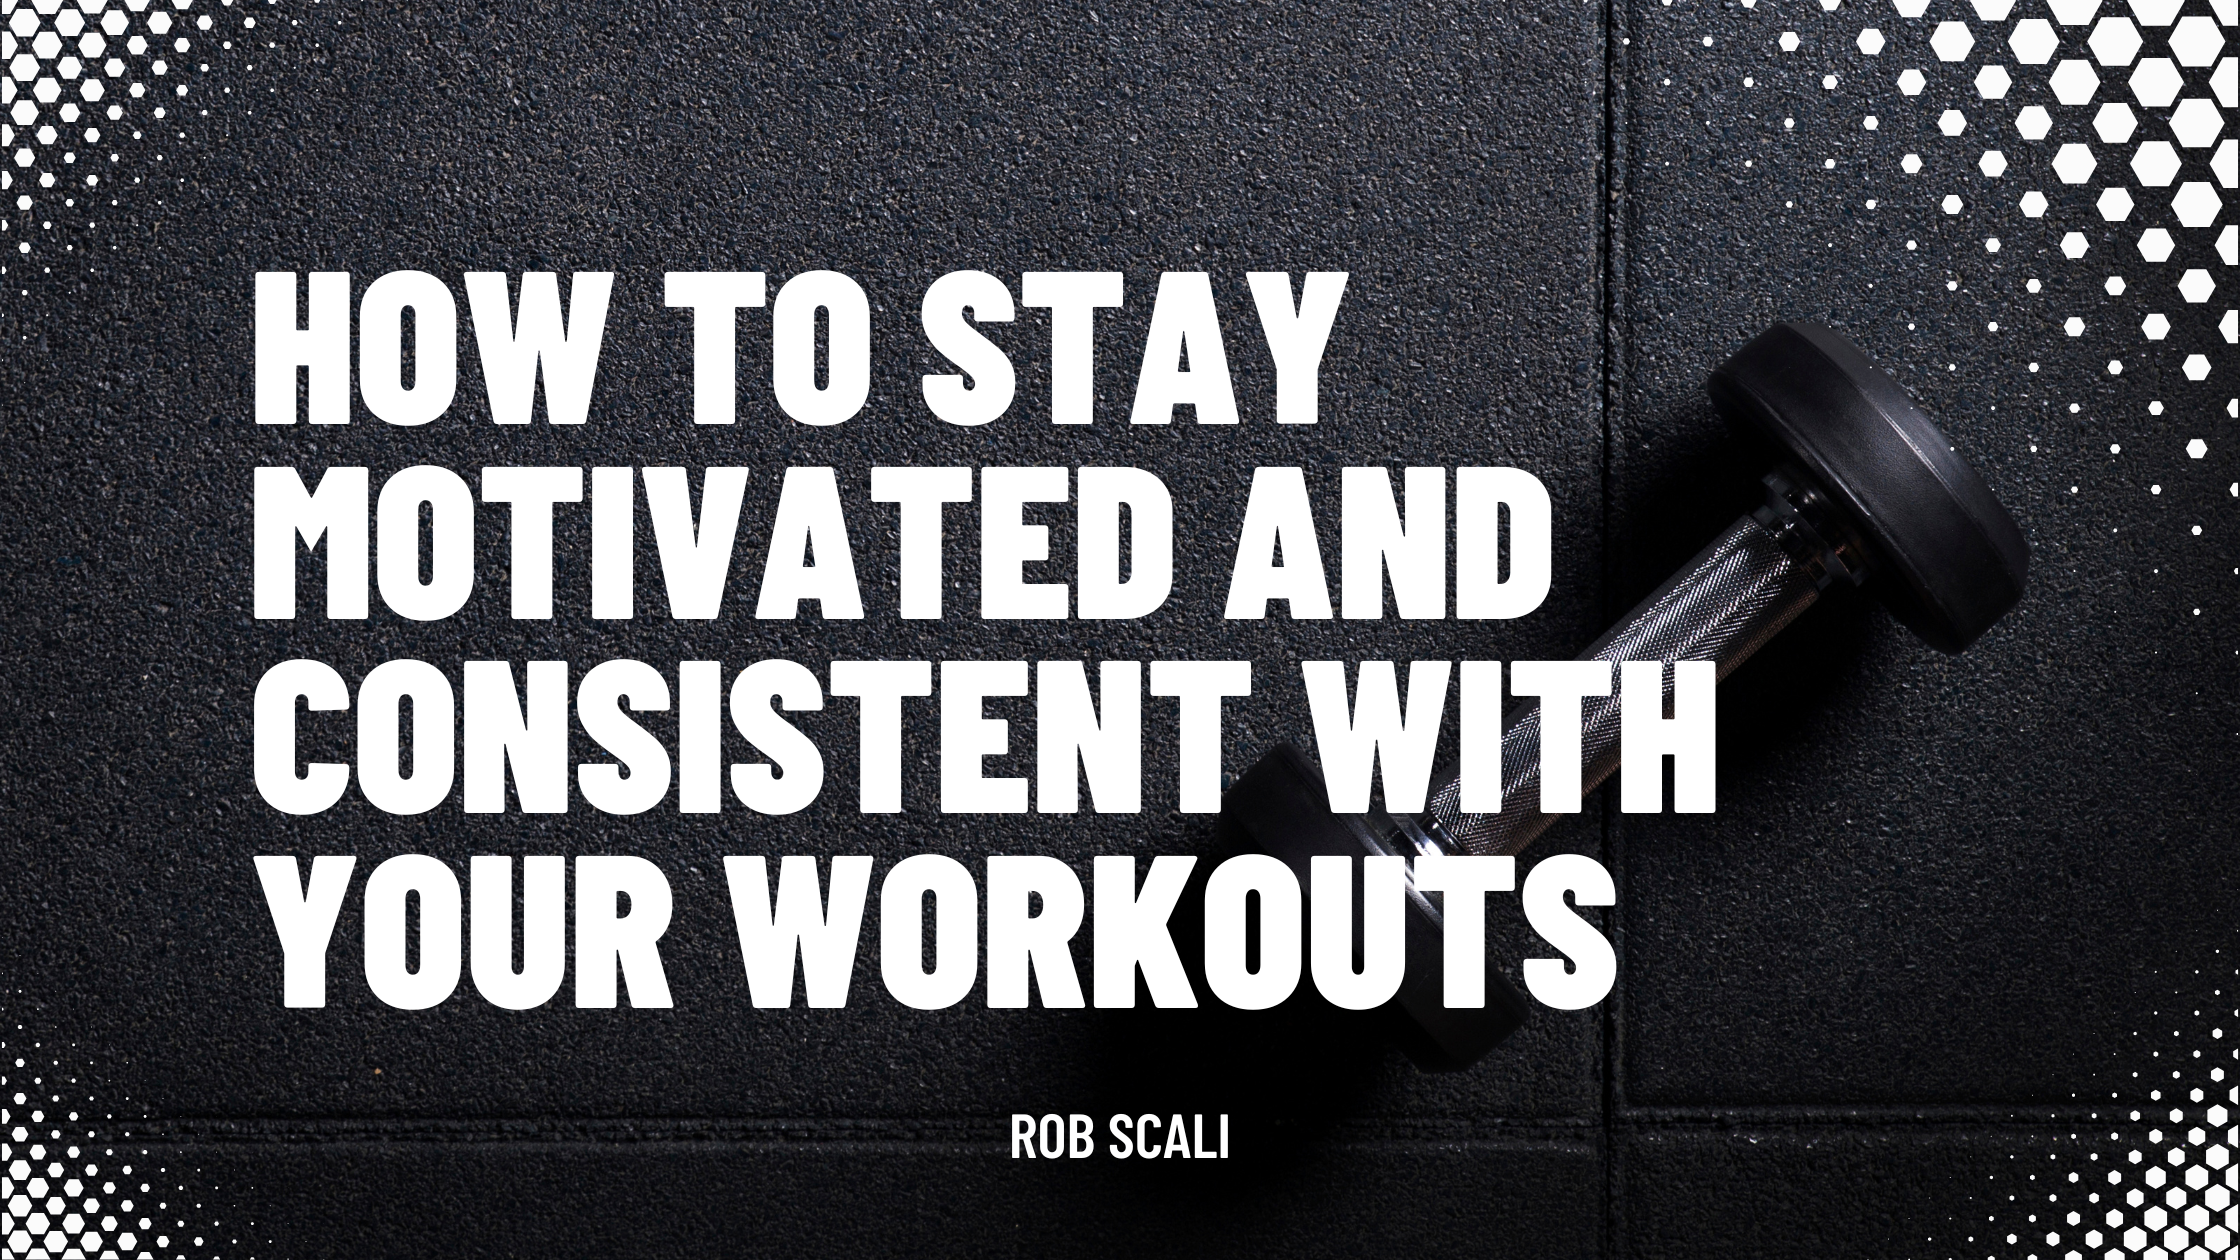 How to Stay Motivated and Consistent with Your Workouts - Rob Scali - Online Coaching